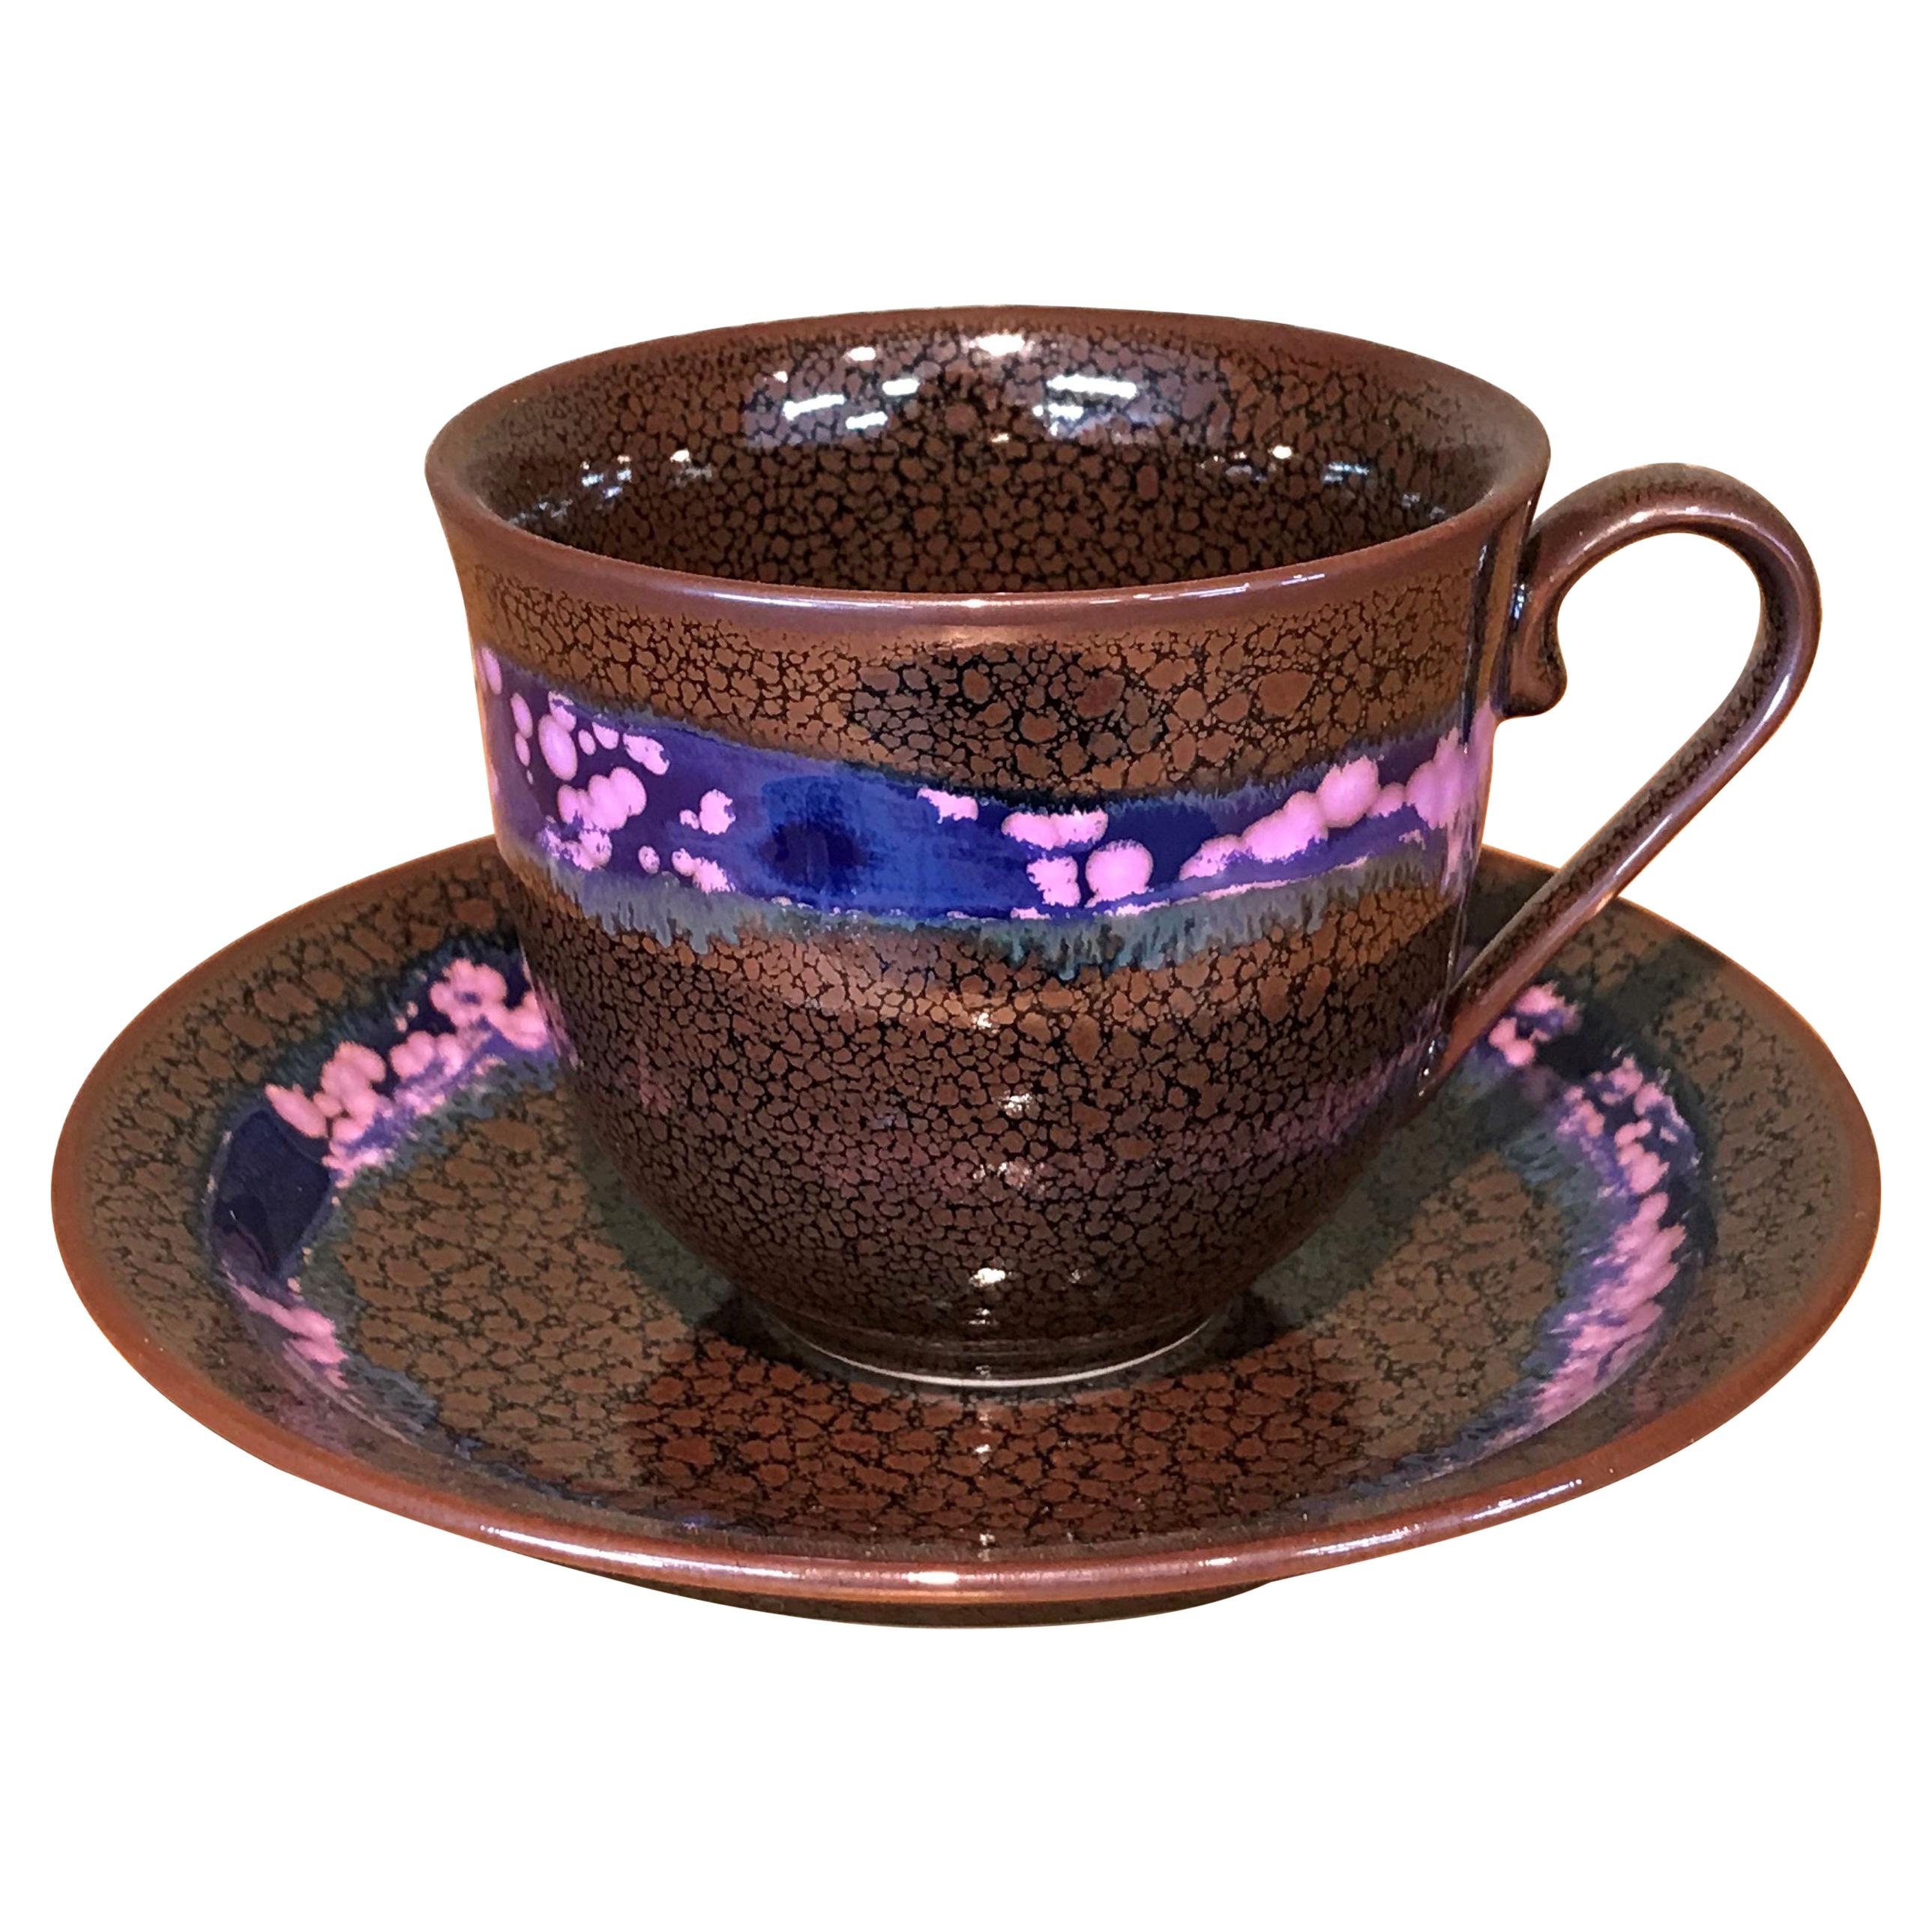 Japanese Brown Blue Hand-Glazed Porcelain Cup and Saucer by Master Artist, 2018